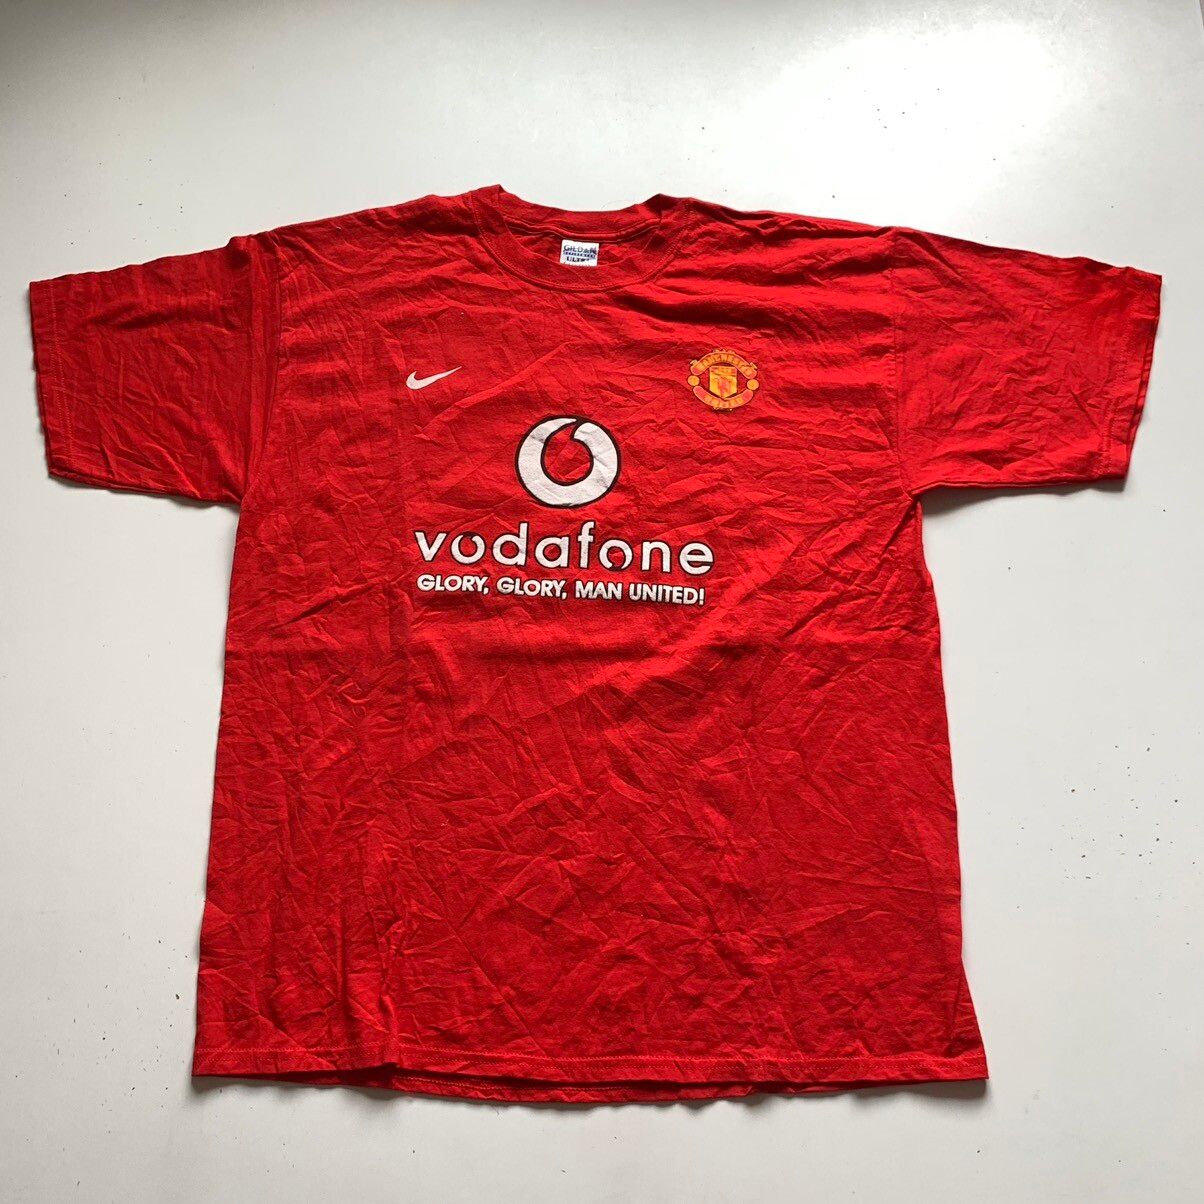 Nike Vintage 2004 Manchester United nike graphic t shirt red Size US XL / EU 56 / 4 - 2 Preview